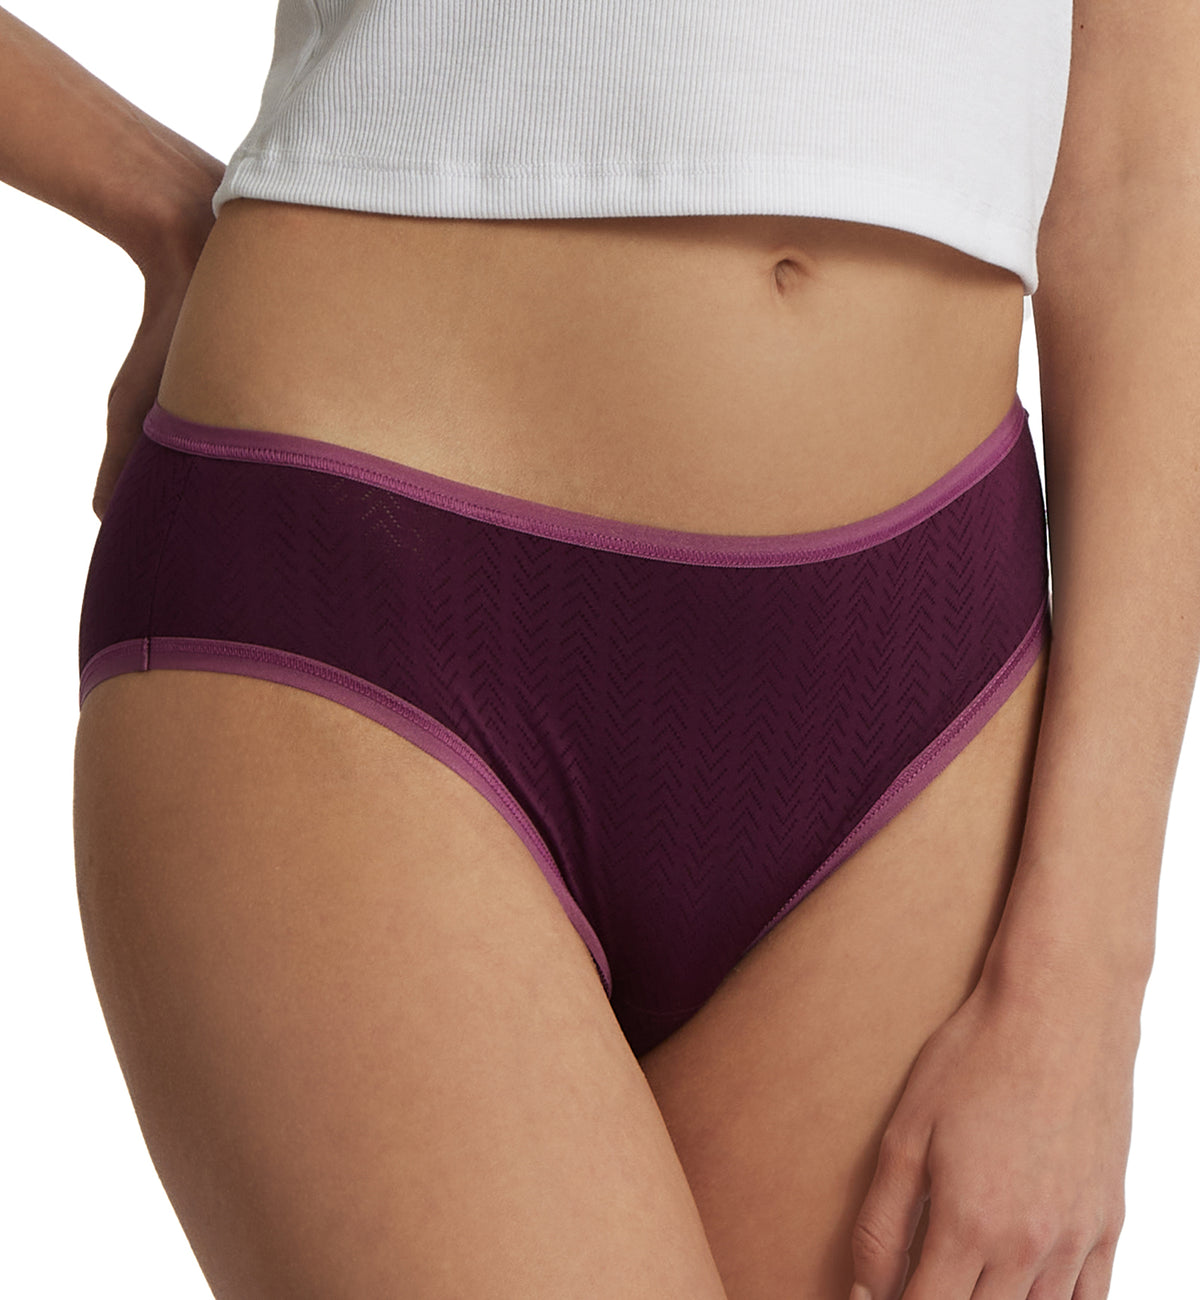 Hanky Panky MoveCalm Ruched Back Brief (2P2184),XS,Dried Cherry/Damson Plum - Dried Cherry/Damson Plum,XS